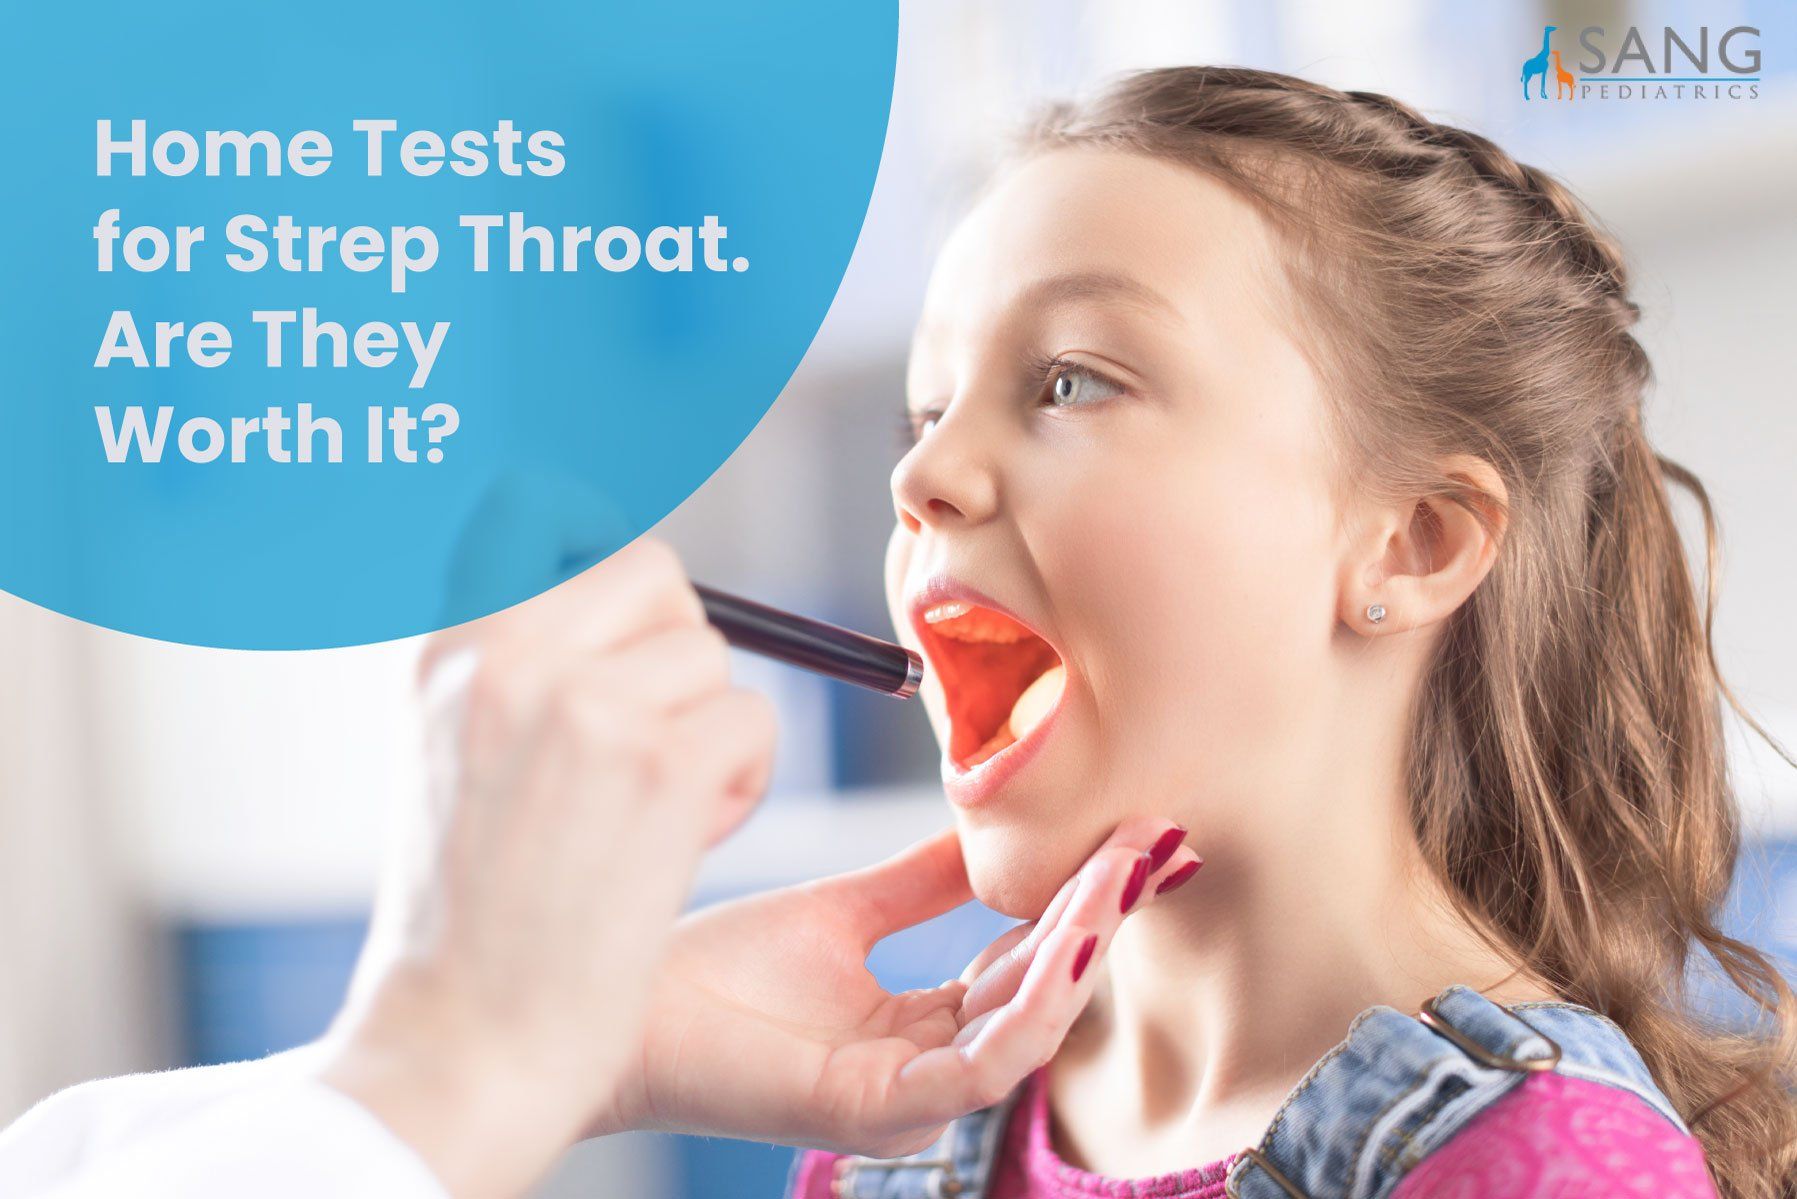 Home Tests For Strep Throat Are They Worth It